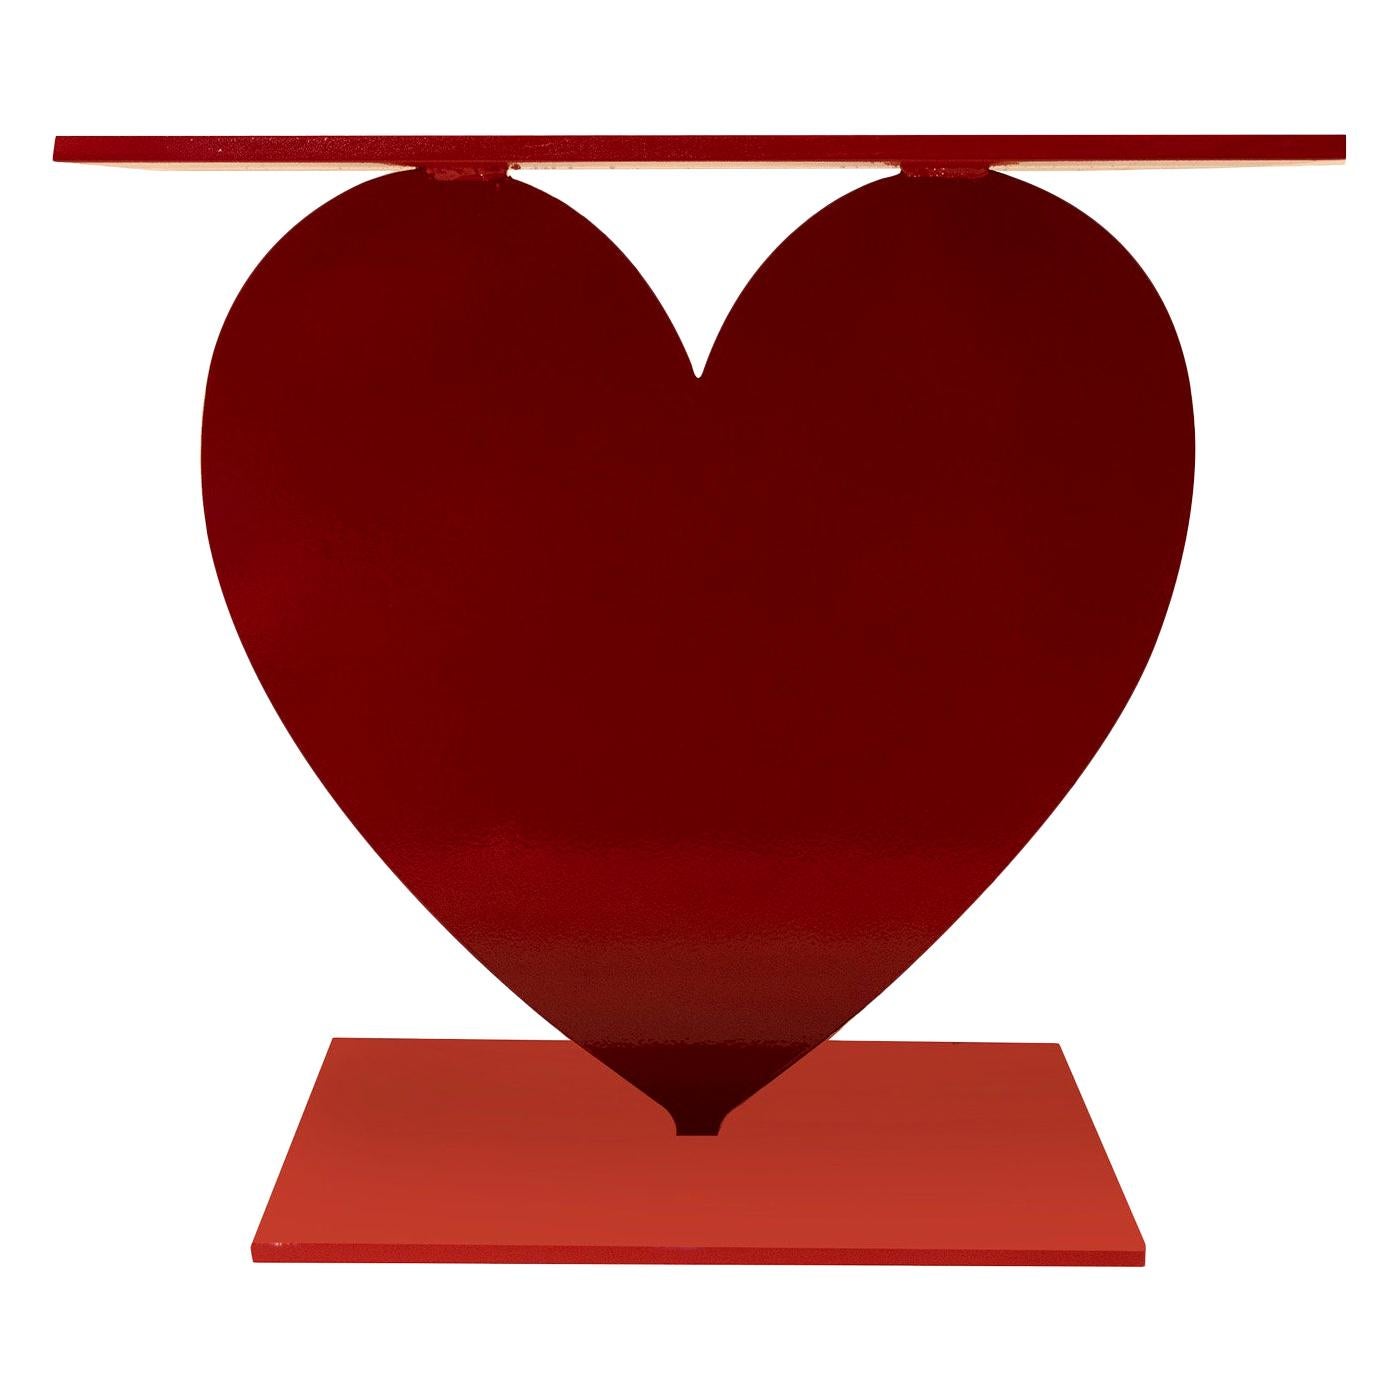 Thriving in an eclectic and monochromatic interior decor, this iron side table shows off a large heart and vibrant red finish that will bring character and verve to any room. Like all the pieces from the Imperfect Love Collection characterized by